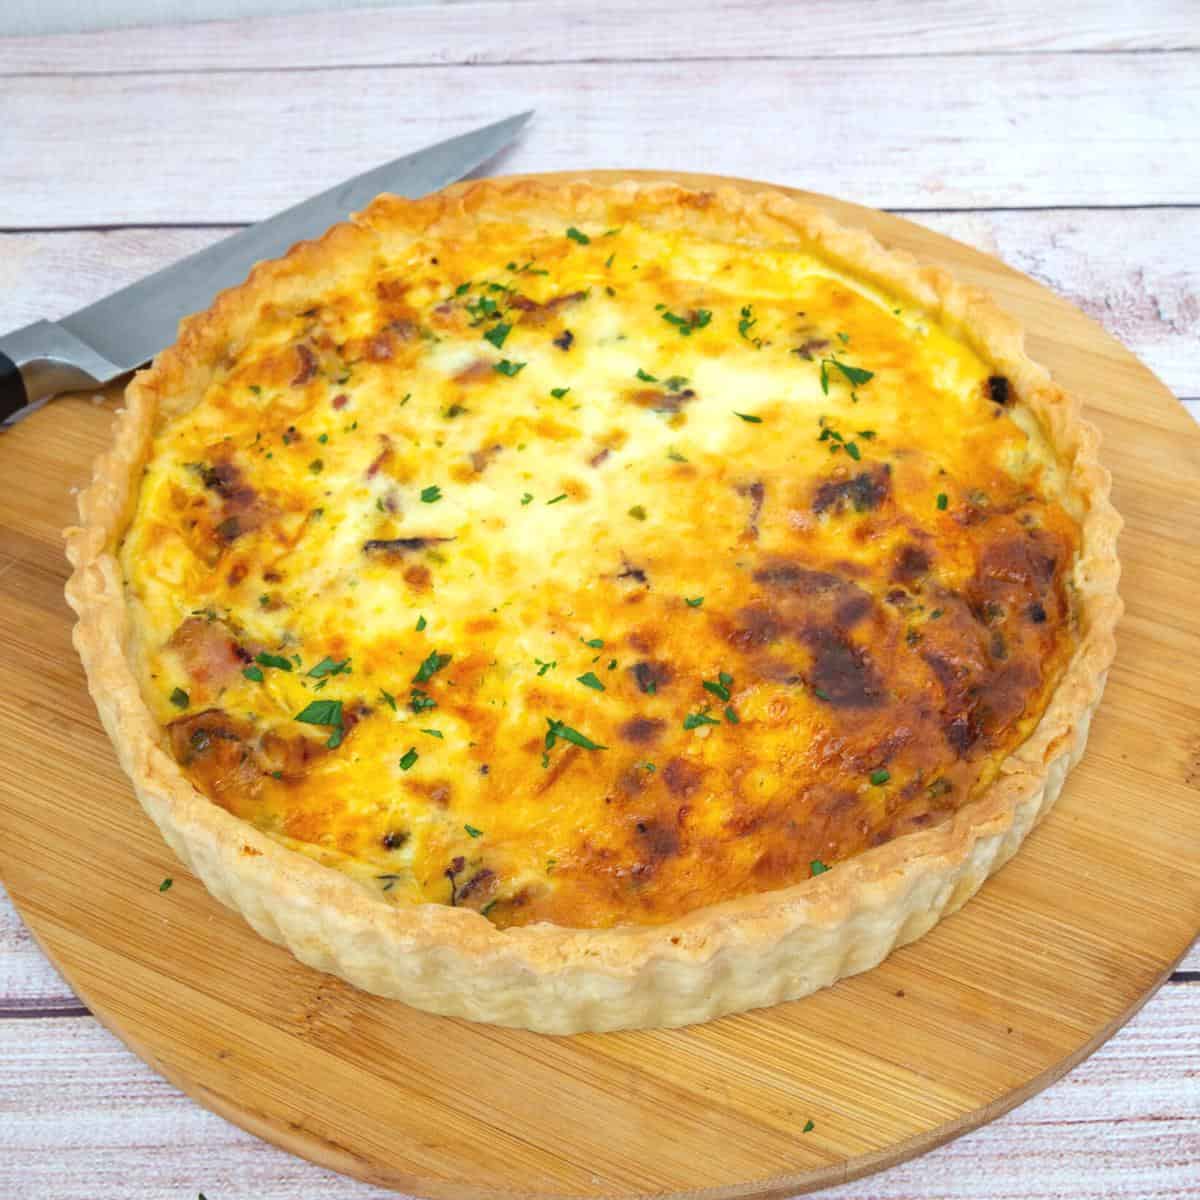 A whole baked quiche on the table.